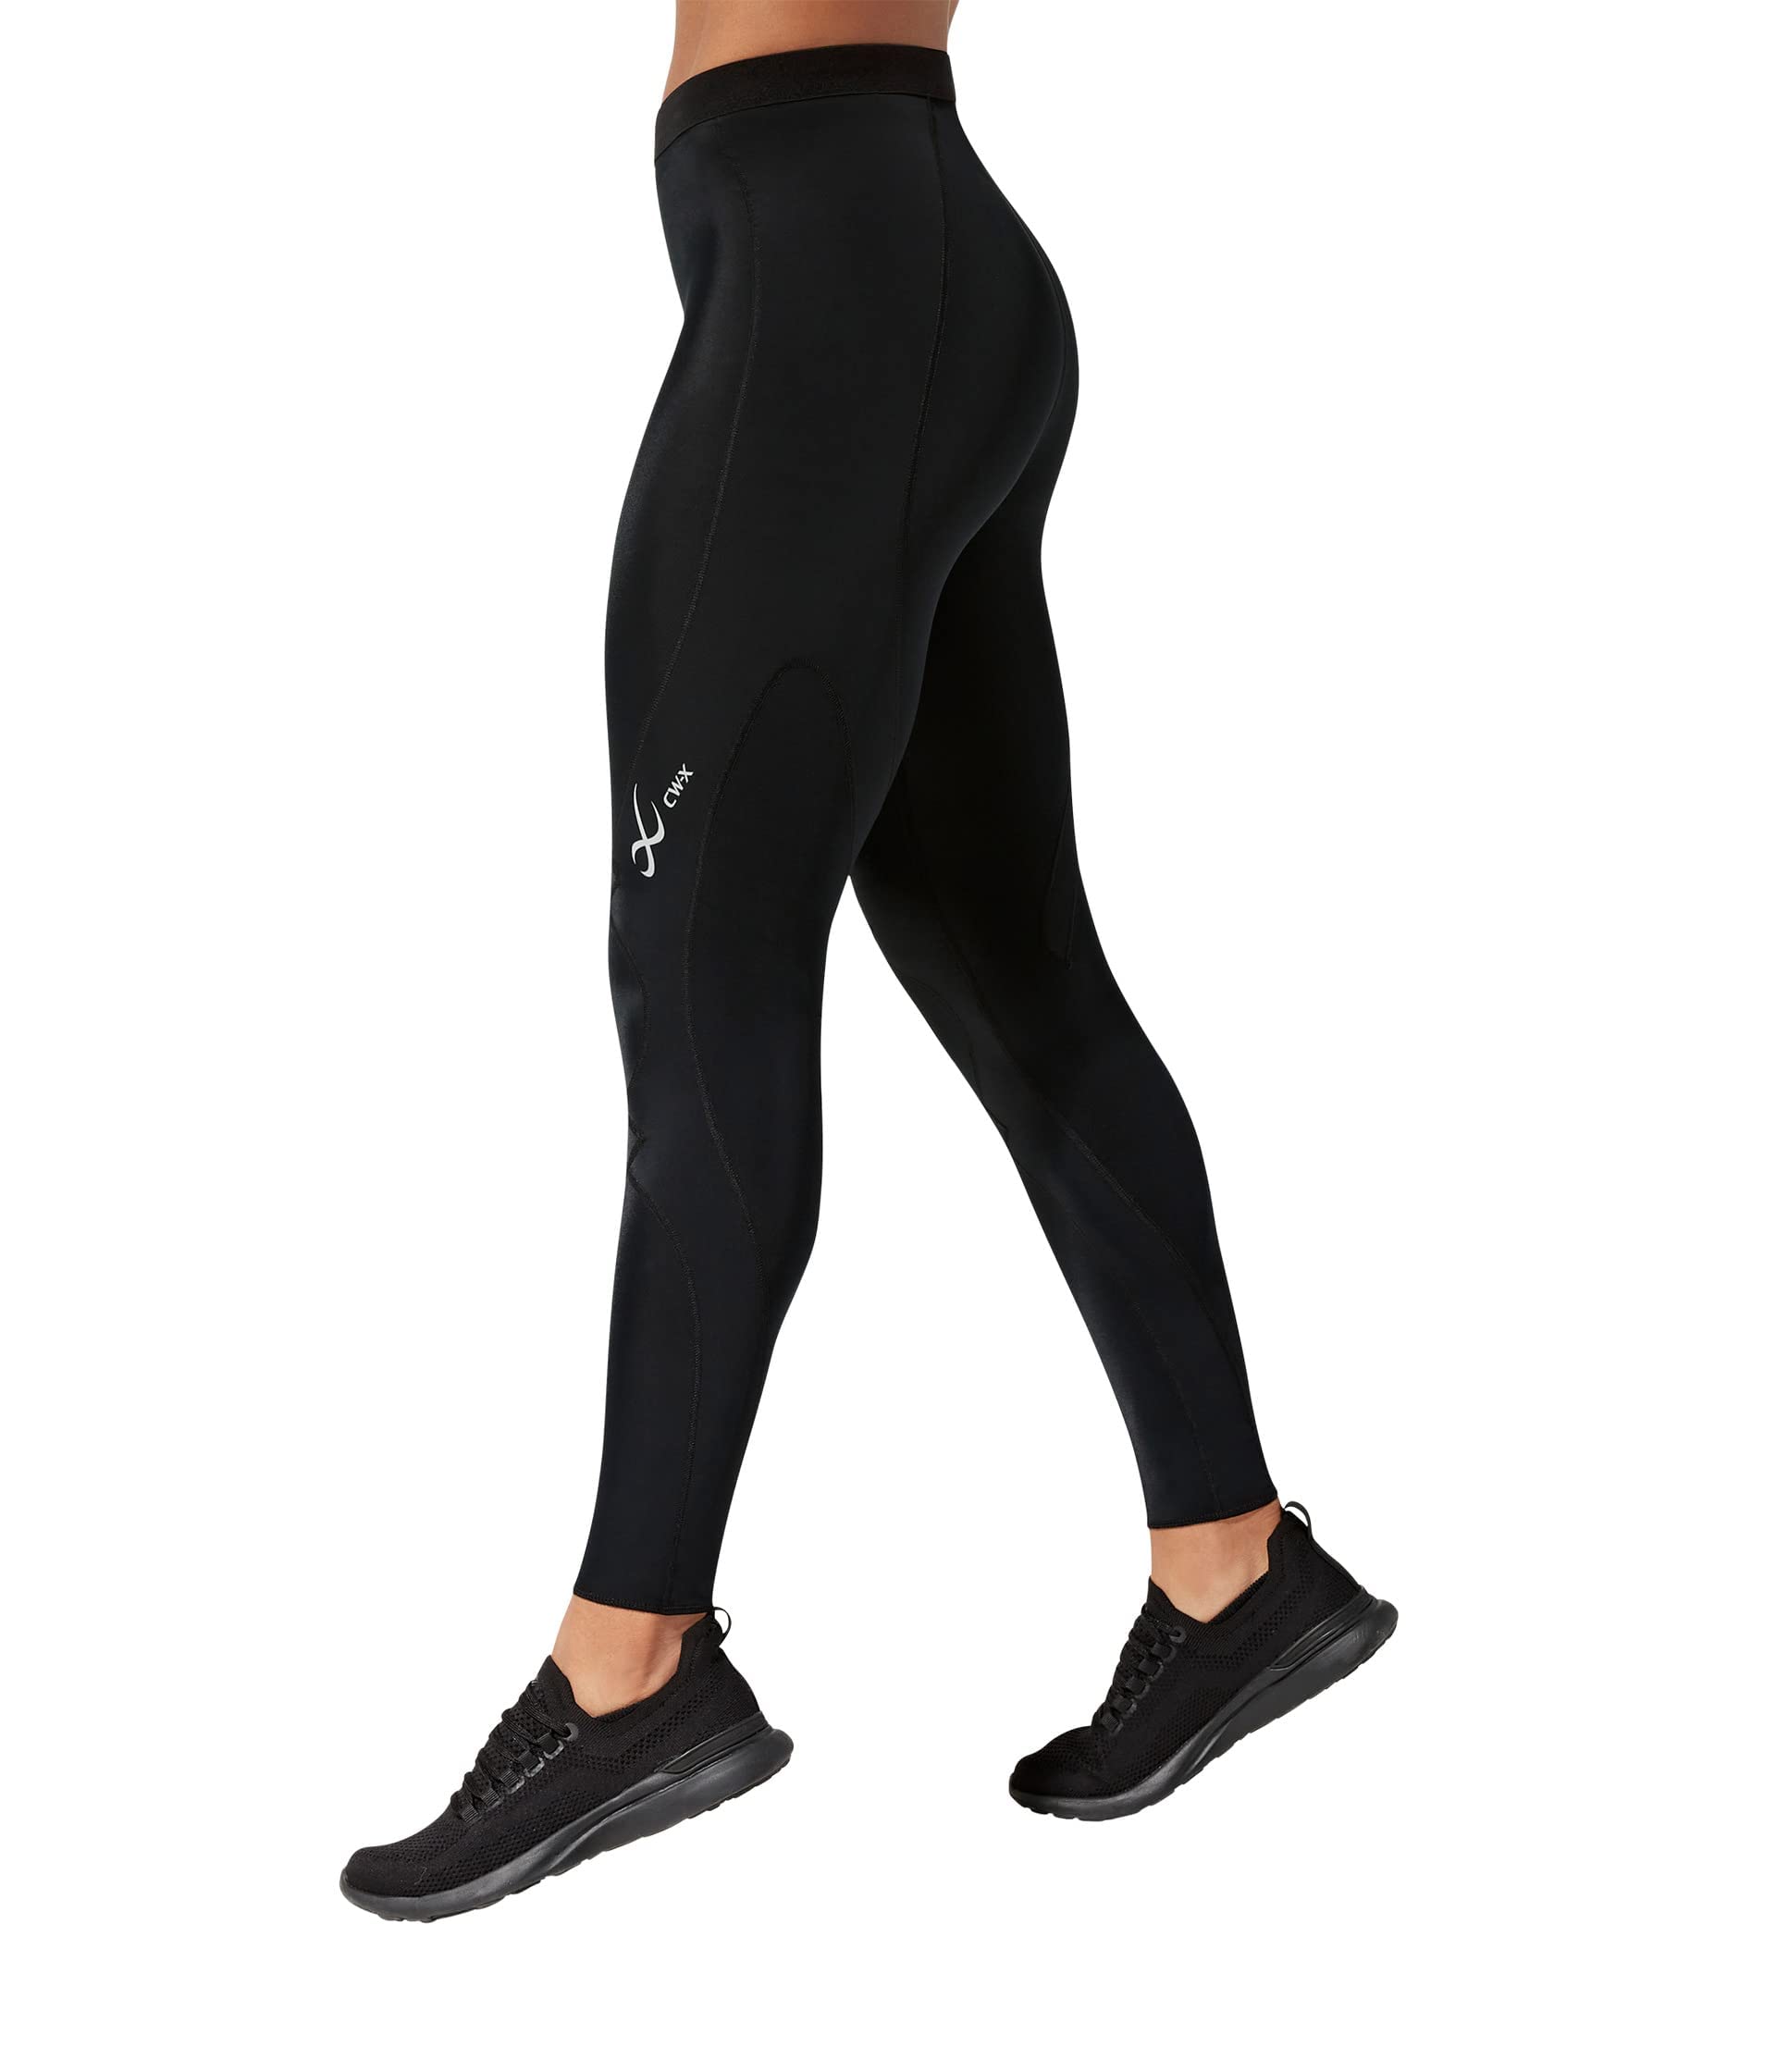 CW-X Women's Expert 3.0 Joint Support Compression Tight